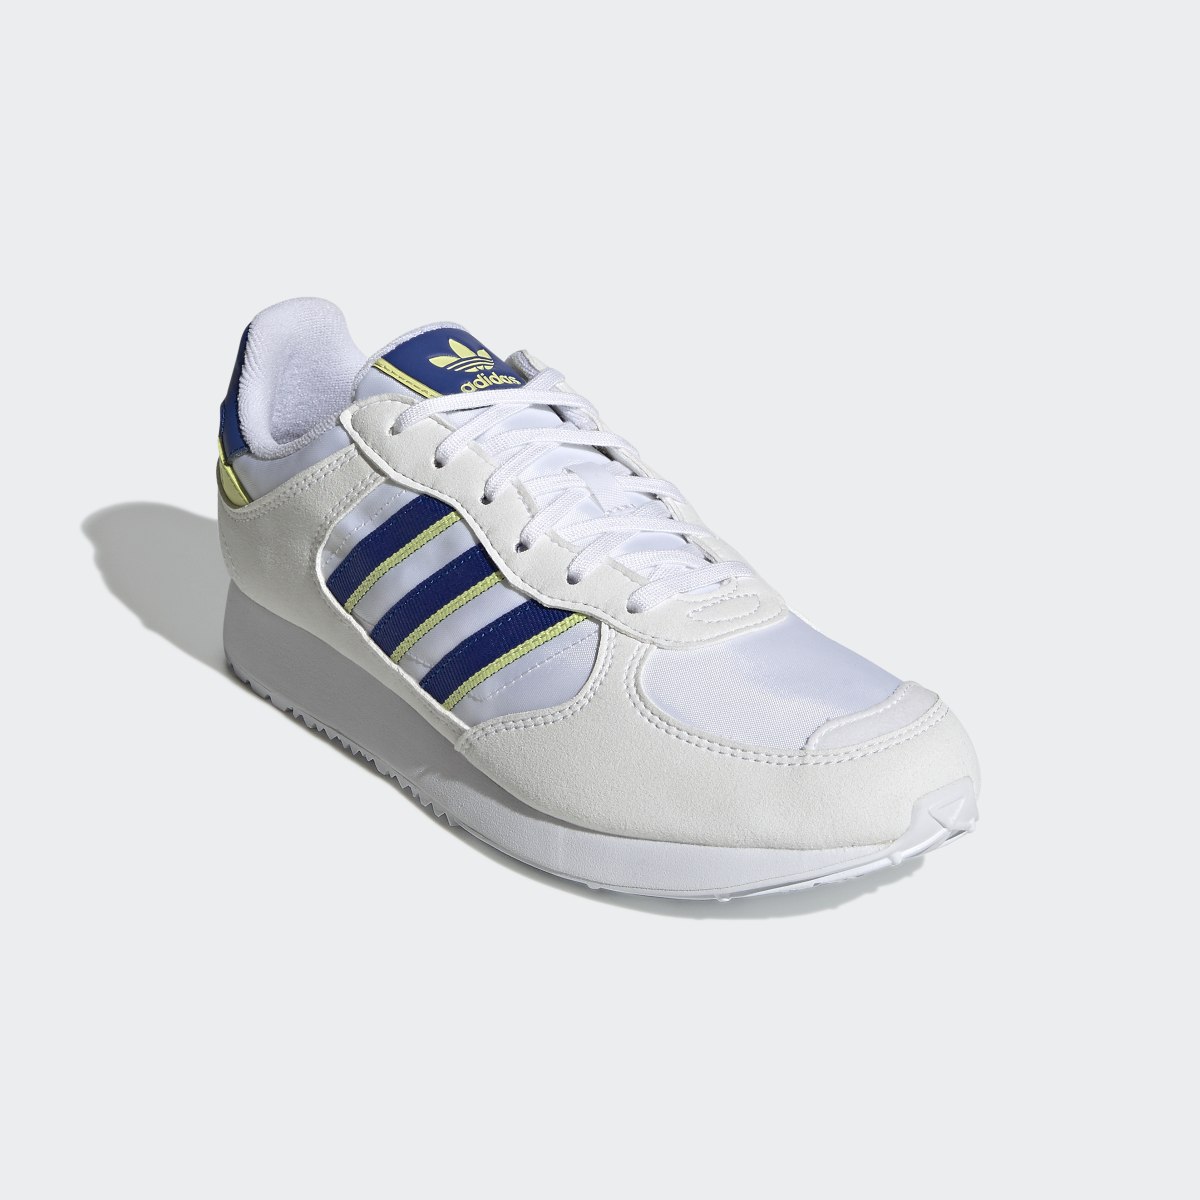 Adidas Special 21 Shoes. 5